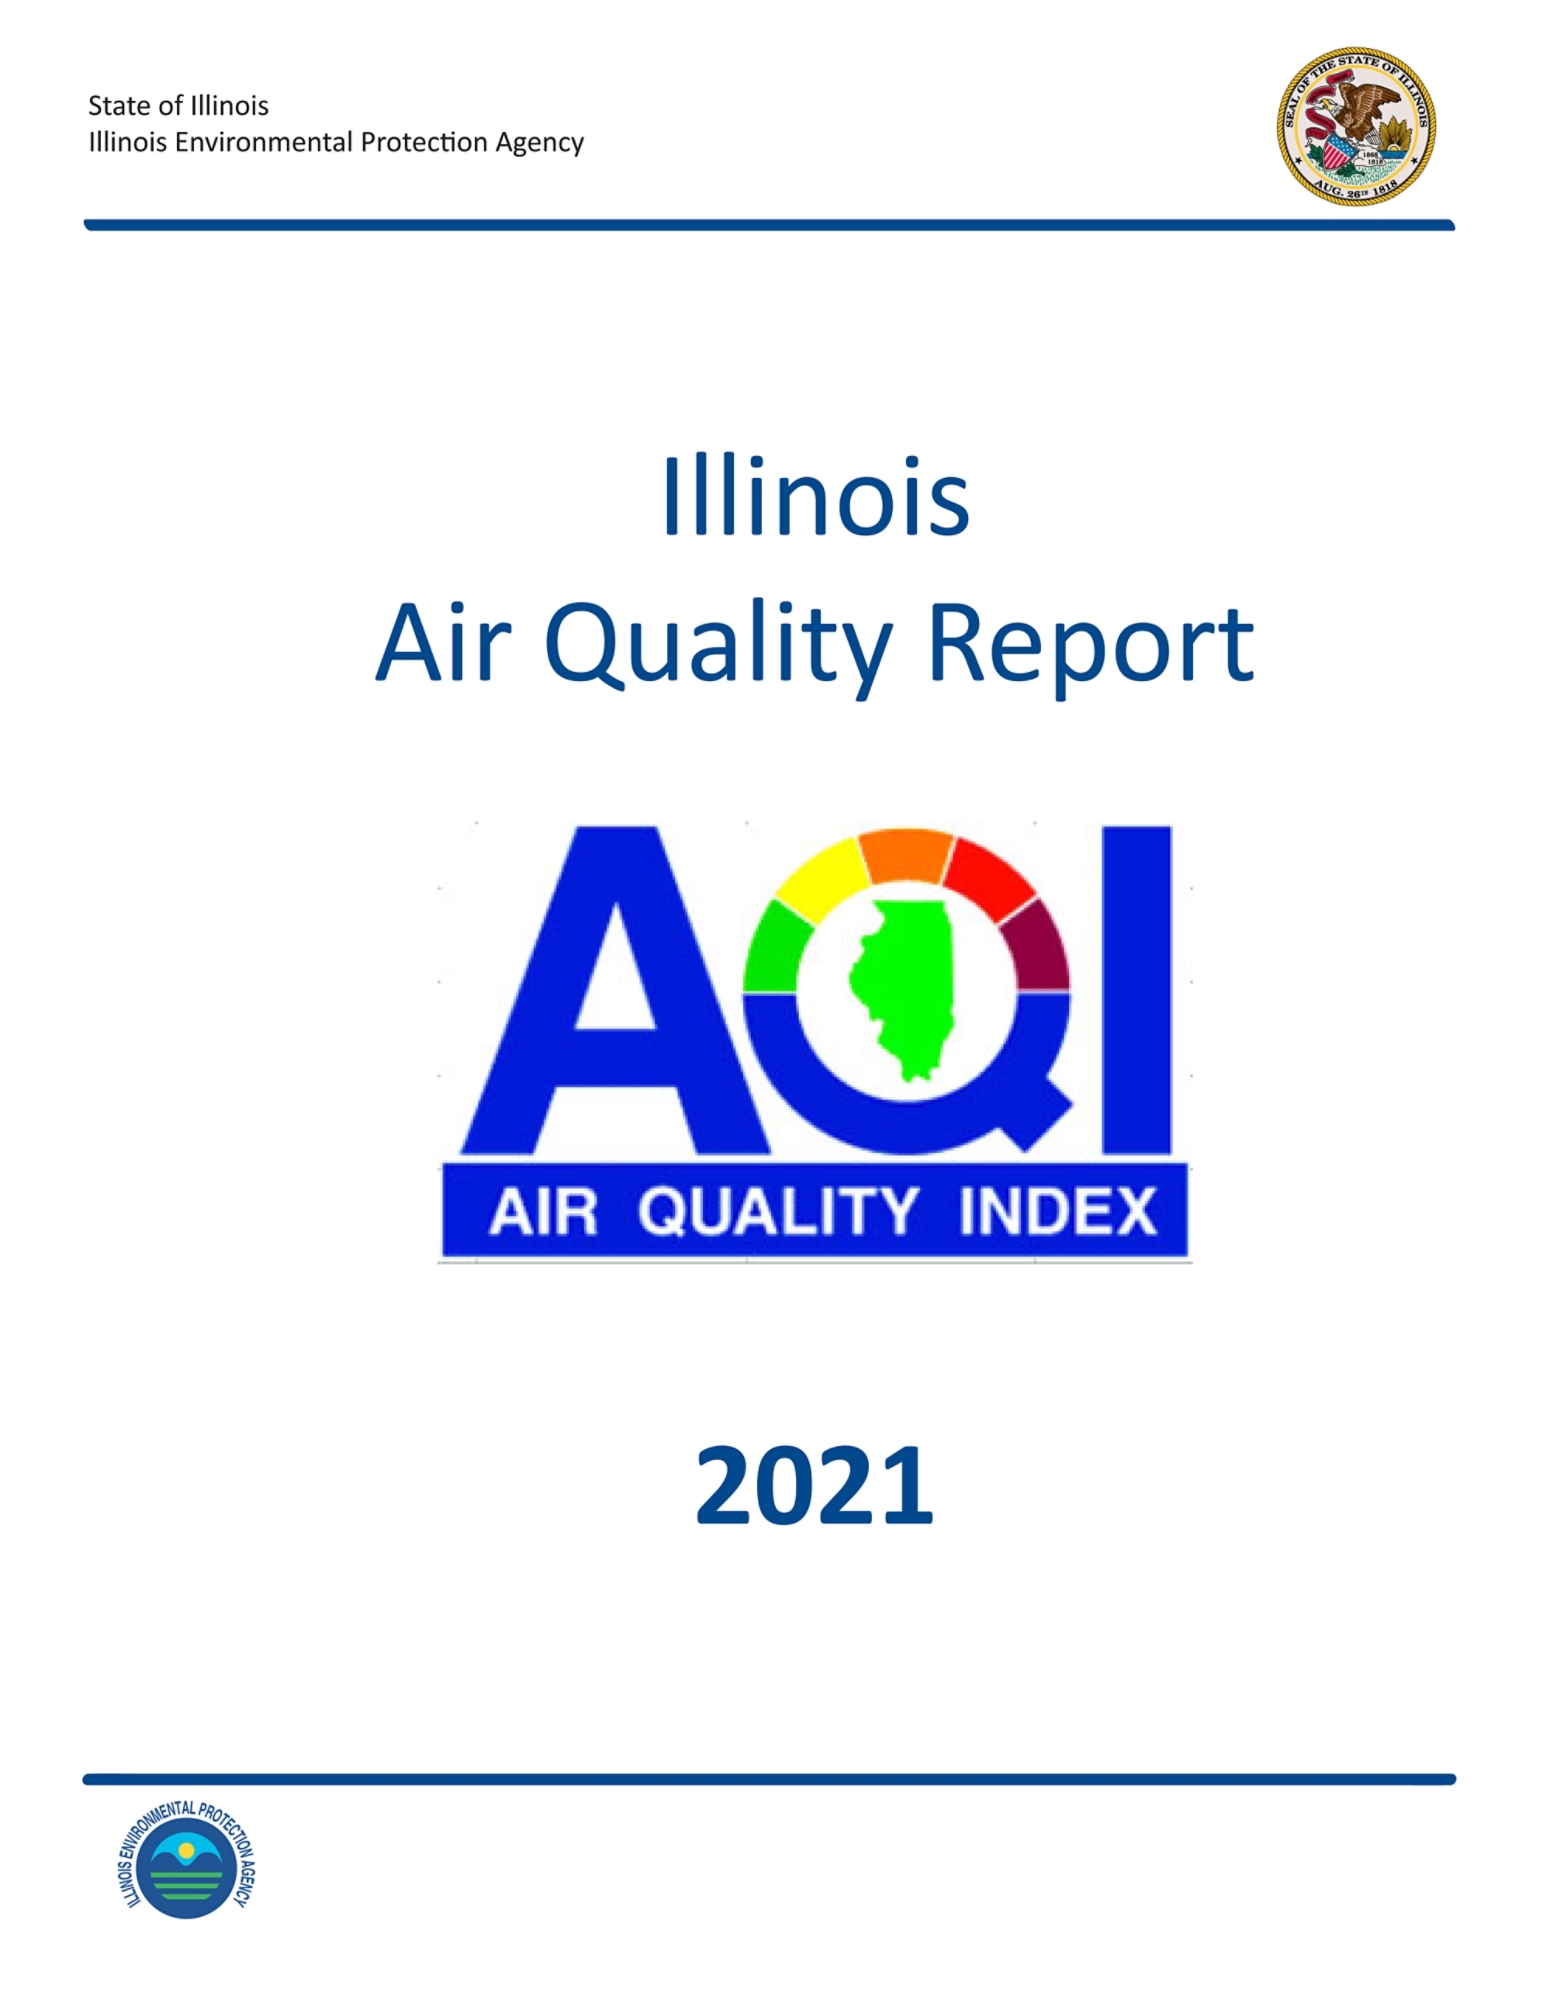 Annual Air Quality Report Cover